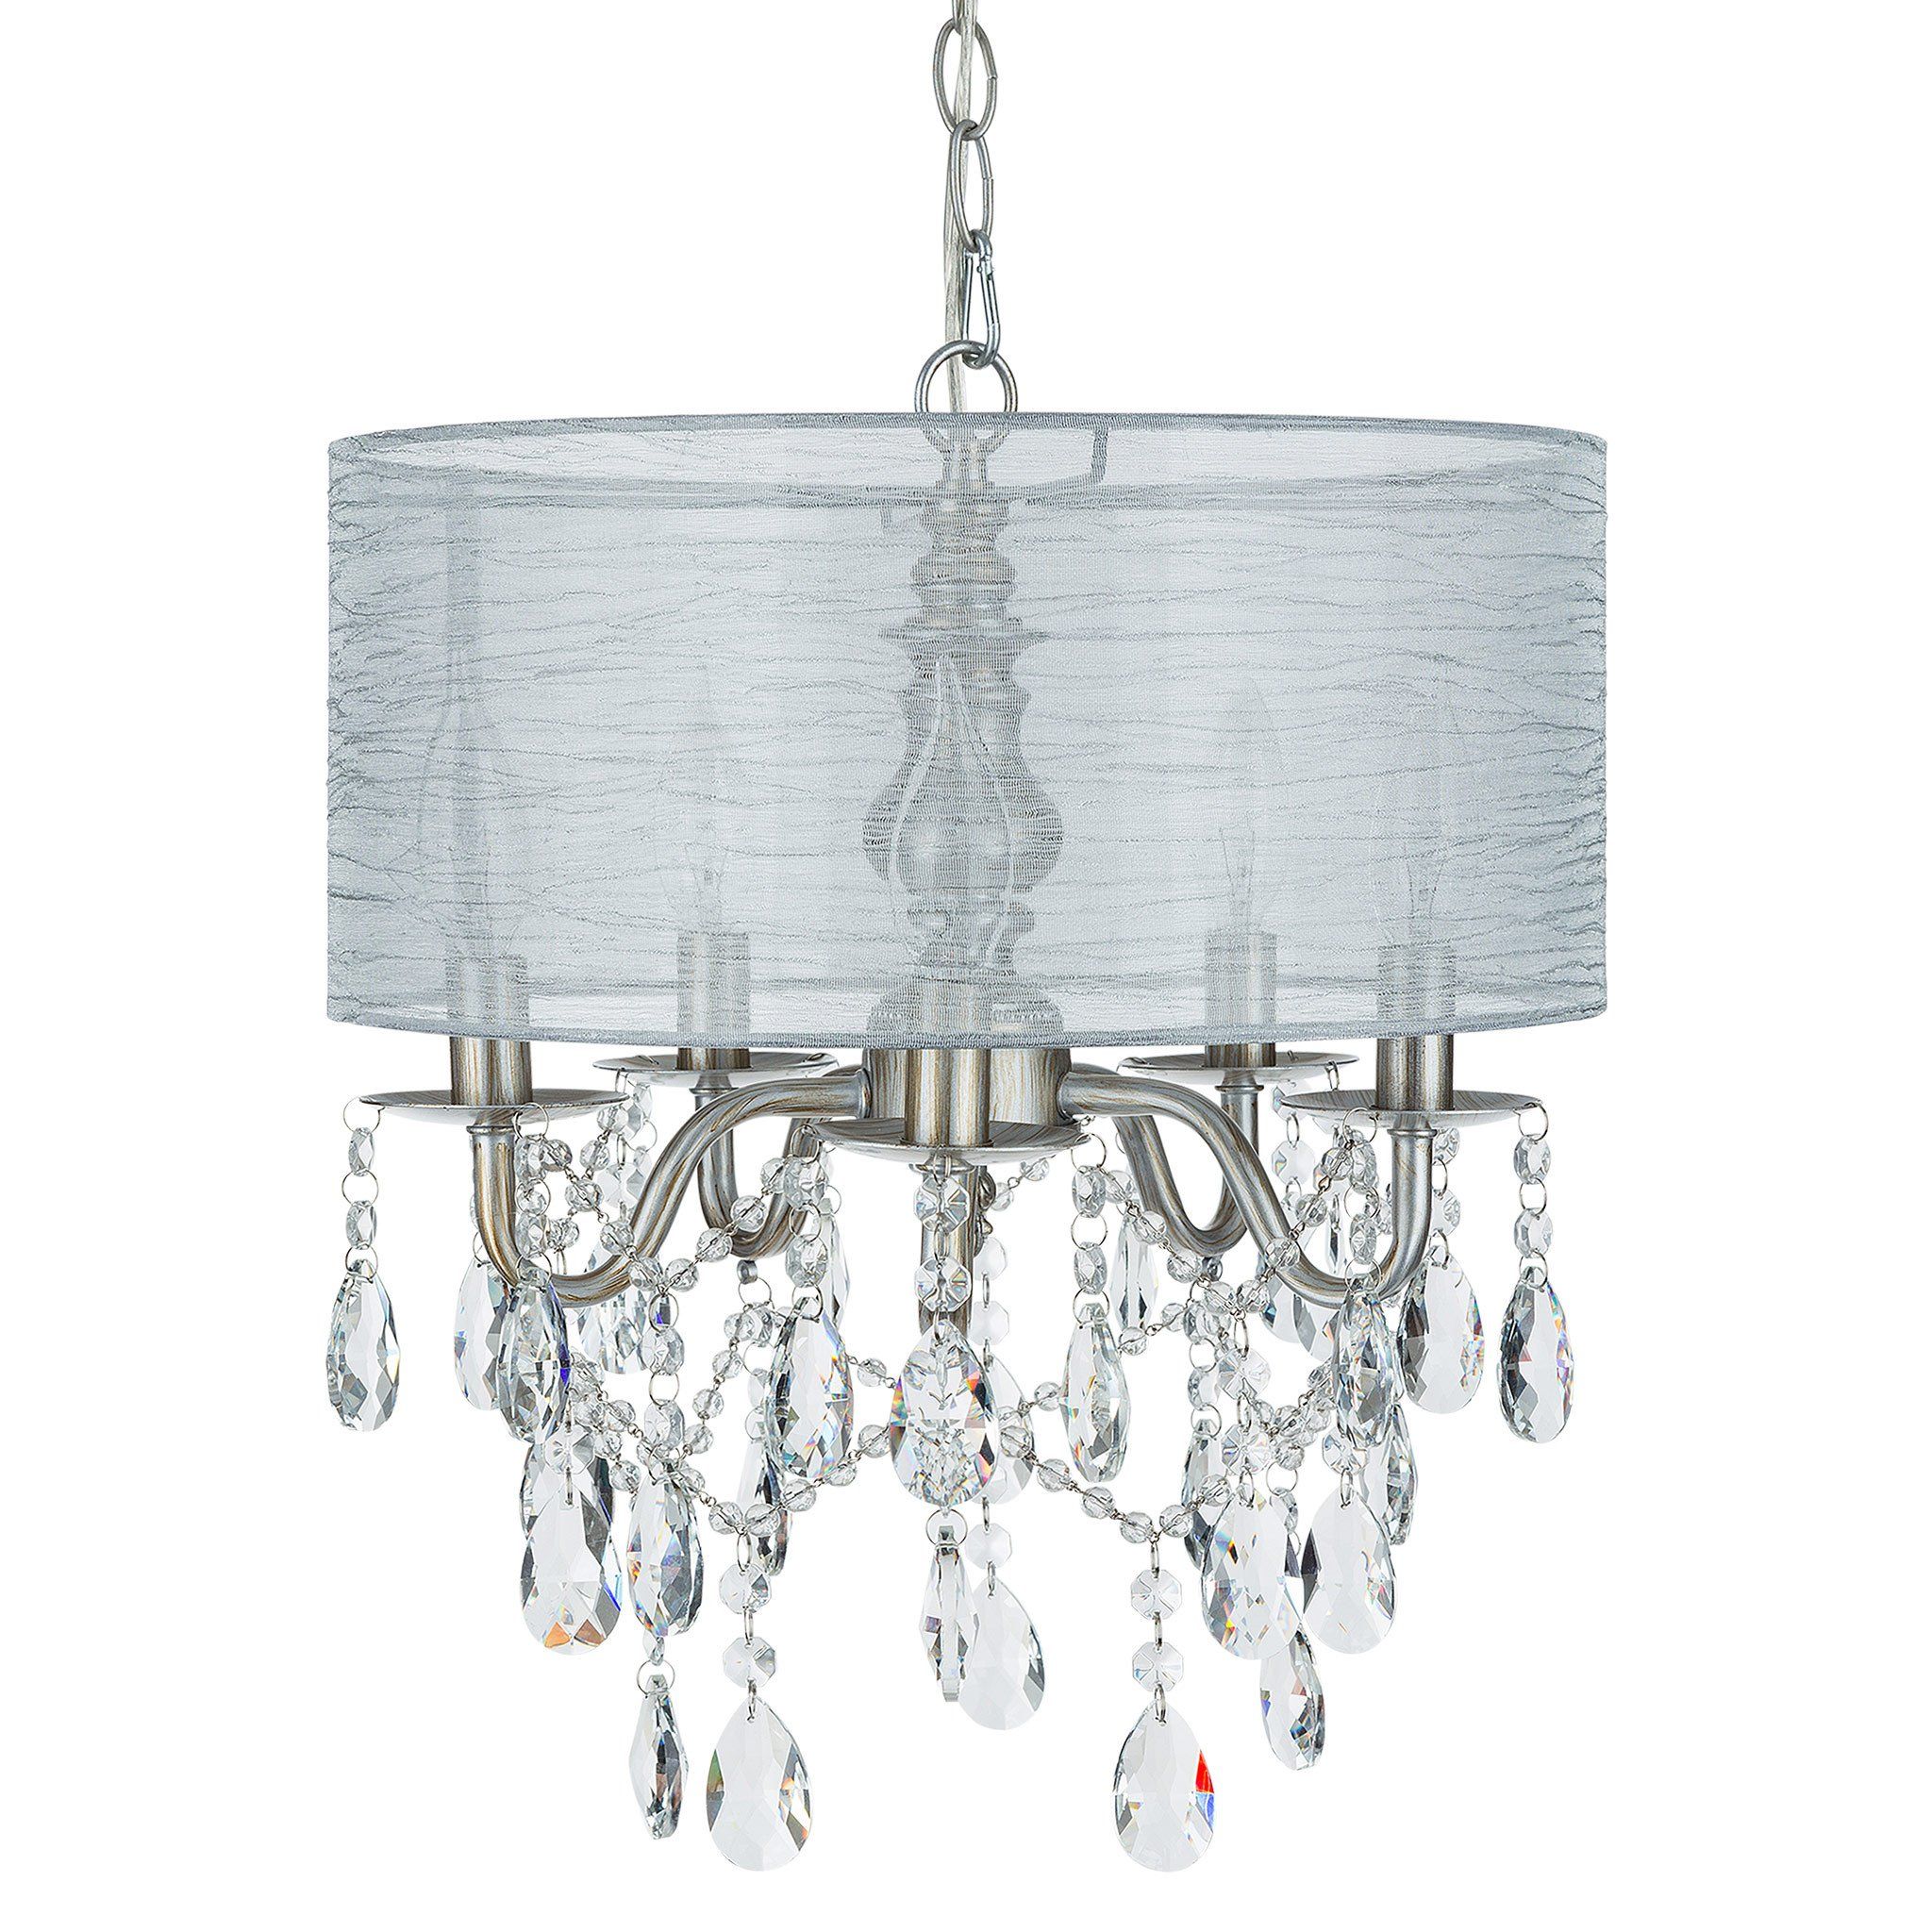 5 Light Crystal Plug In Chandelier With Cylinder Shade Throughout Lindsey 4 Light Drum Chandeliers (View 8 of 30)